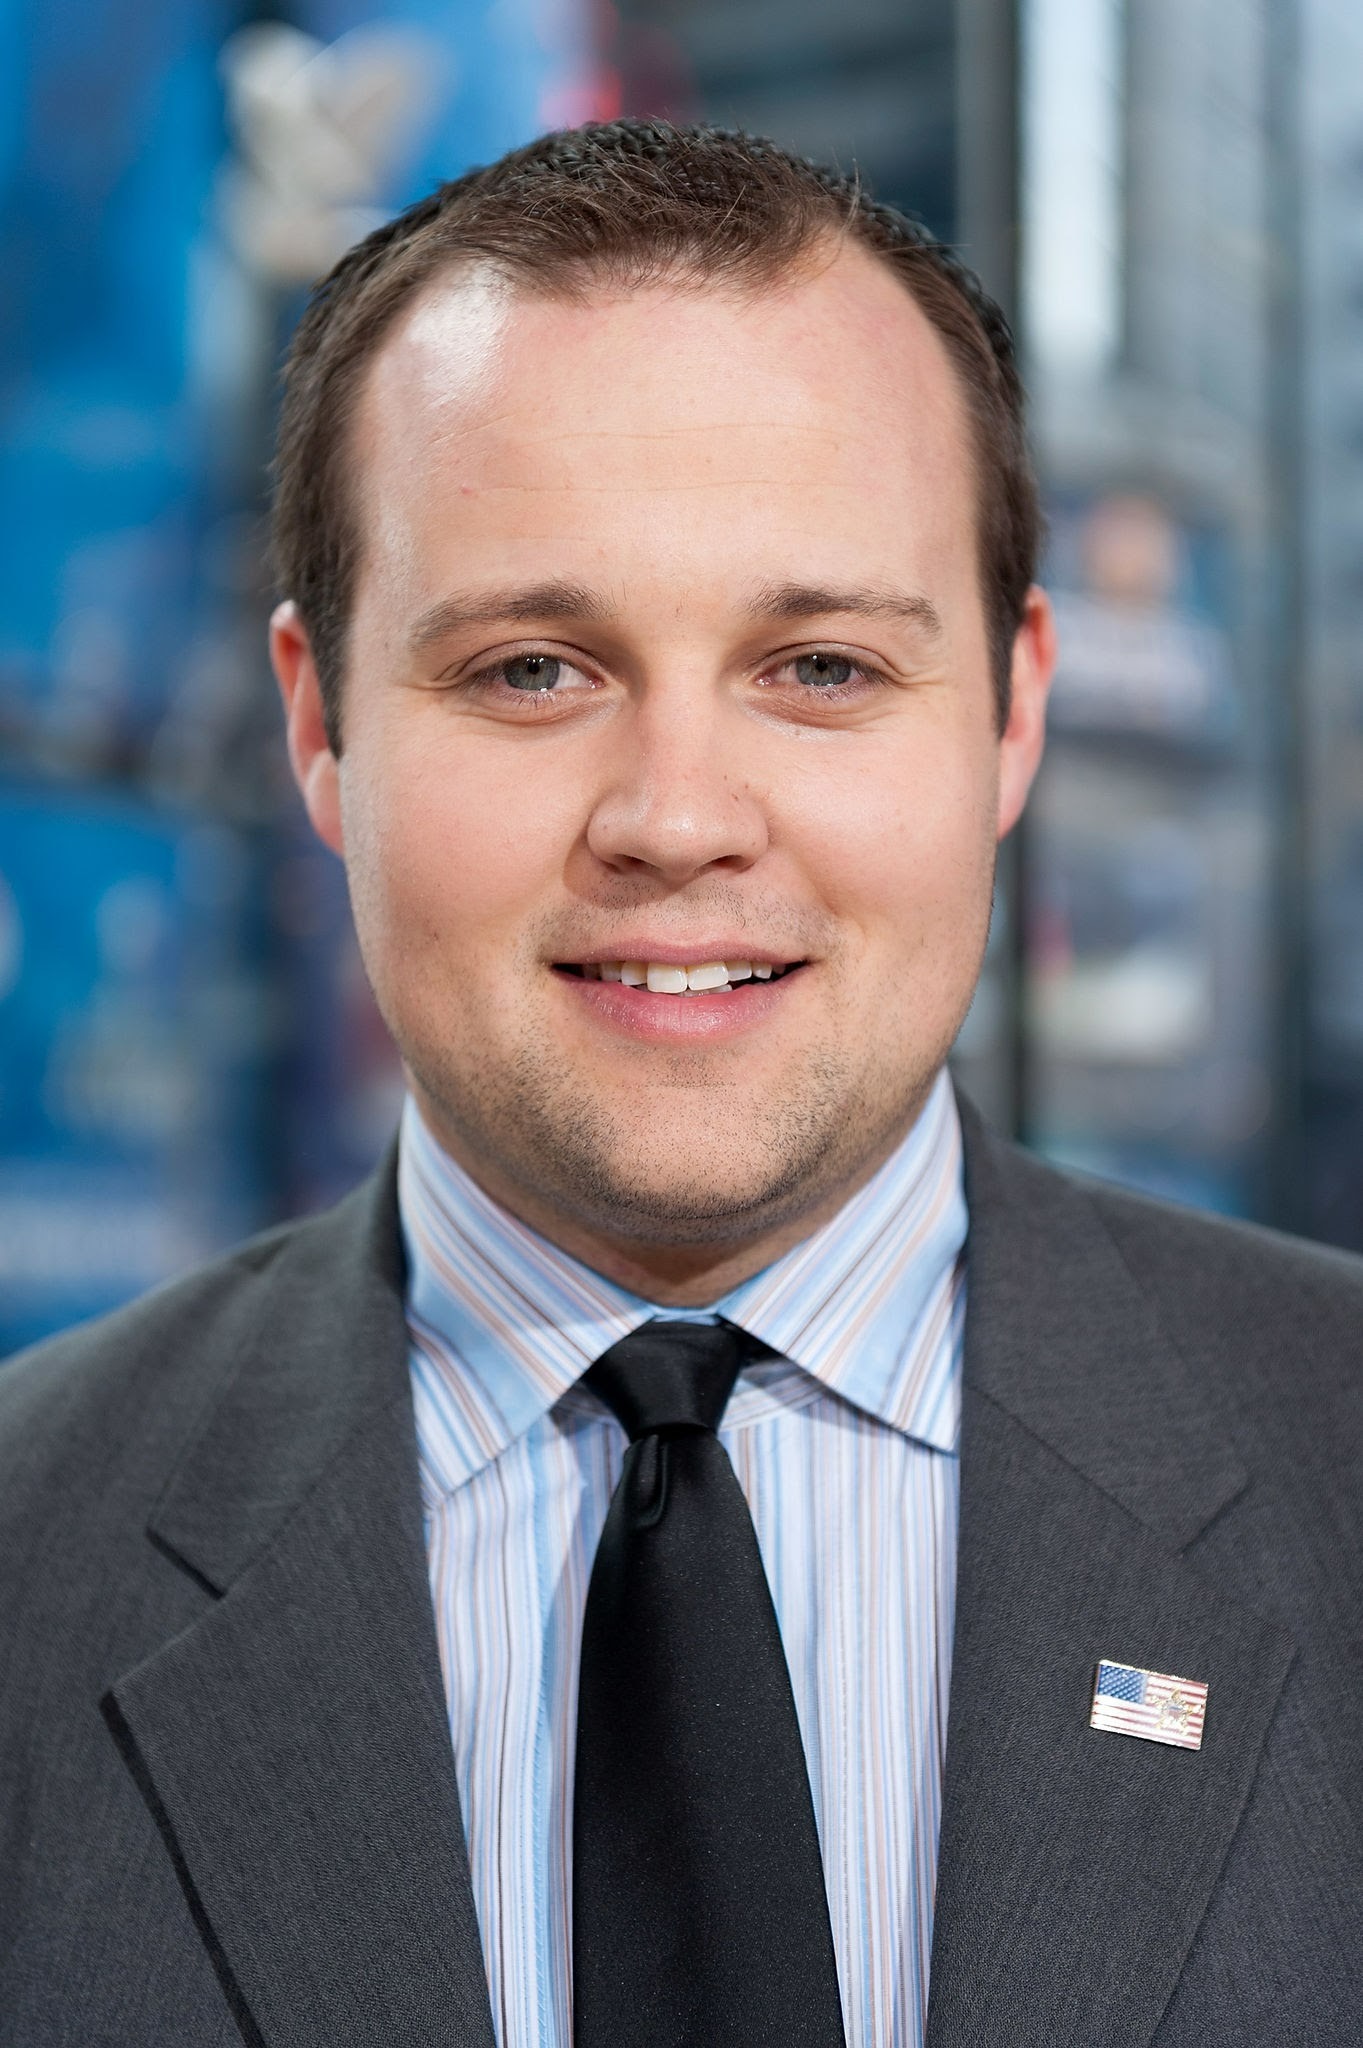 Is Josh Duggar going to attend another Hearing soon ?